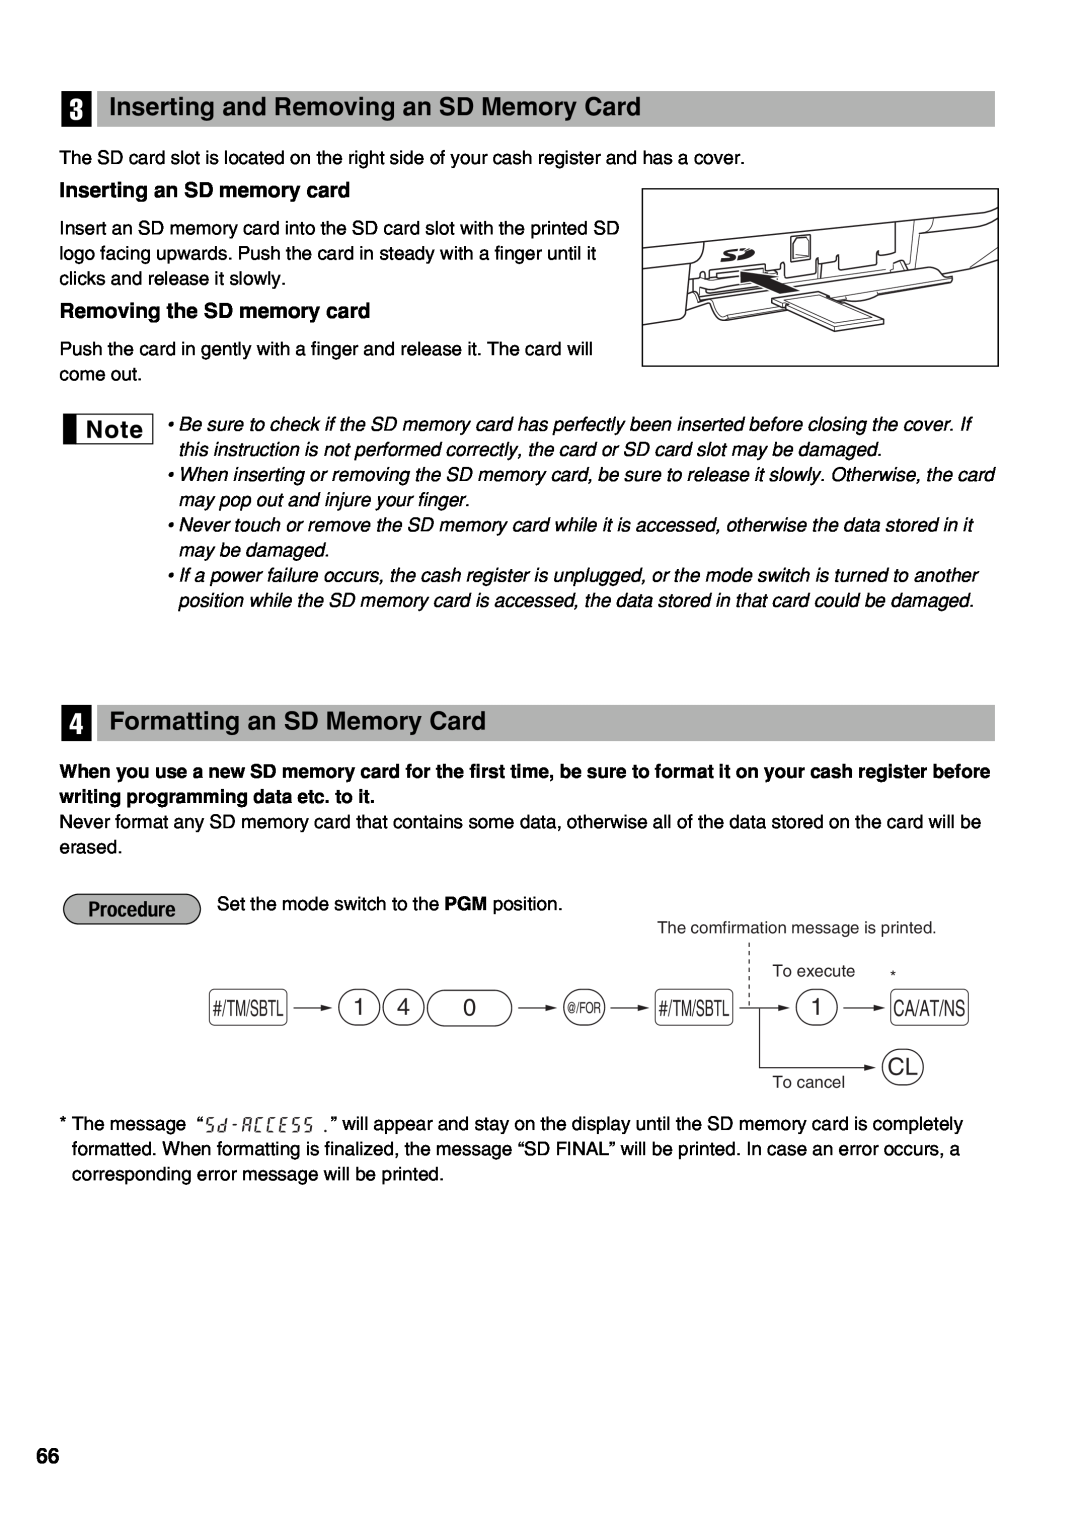 Sharp XE-A21S instruction manual s 140 @ s, Inserting and Removing an SD Memory Card, Formatting an SD Memory Card 